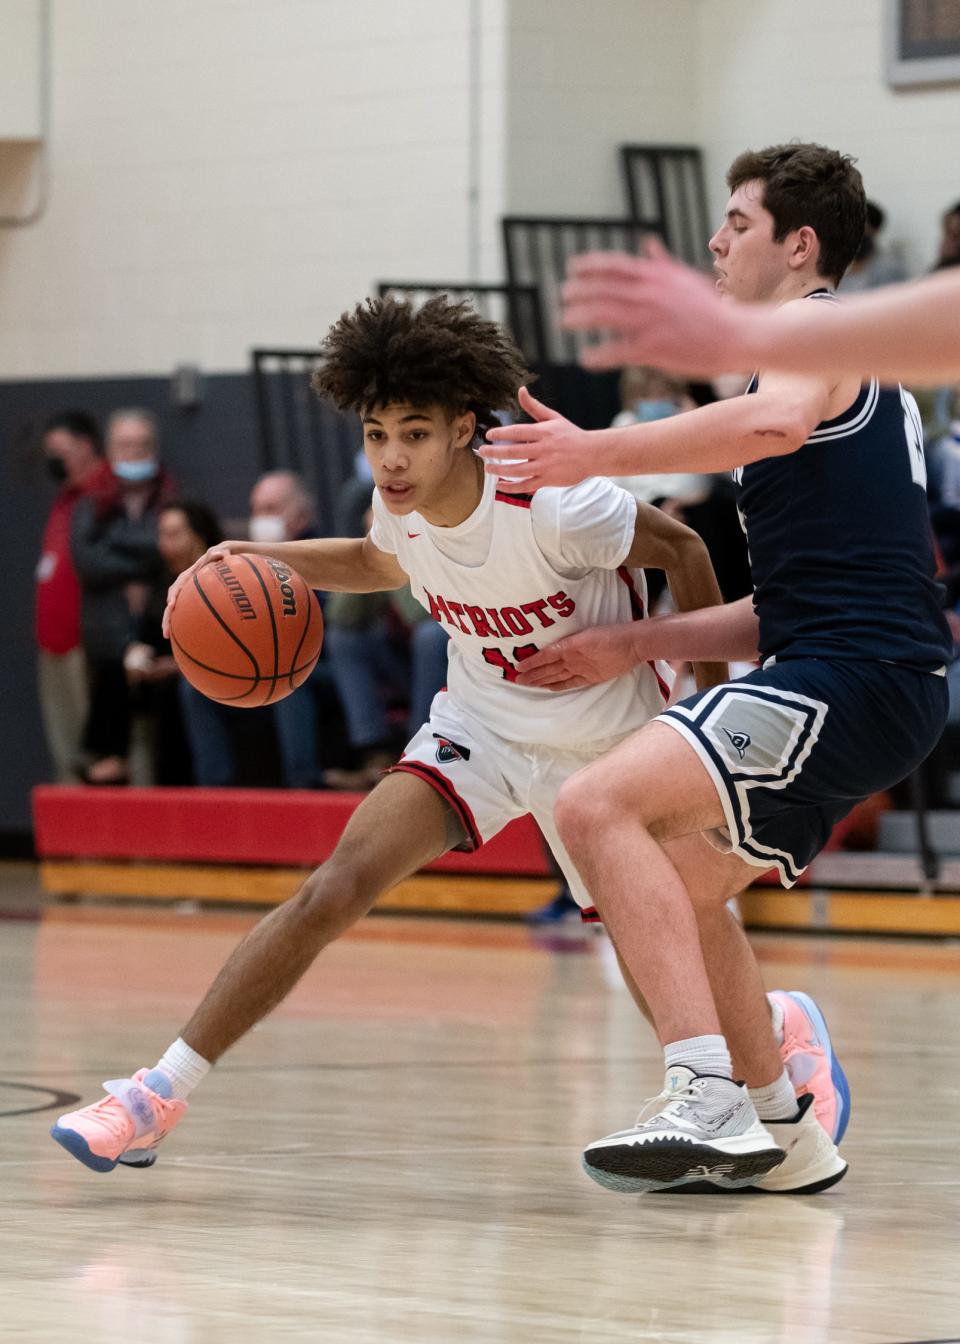 Germantown Academy's Bryce Rollerson dribbles past Malvern Prep's Andrew Phillips, on Friday, January 14, 2022, at Germantown Academy in Fort Washington. The Friars upended the Patriots 69-42.